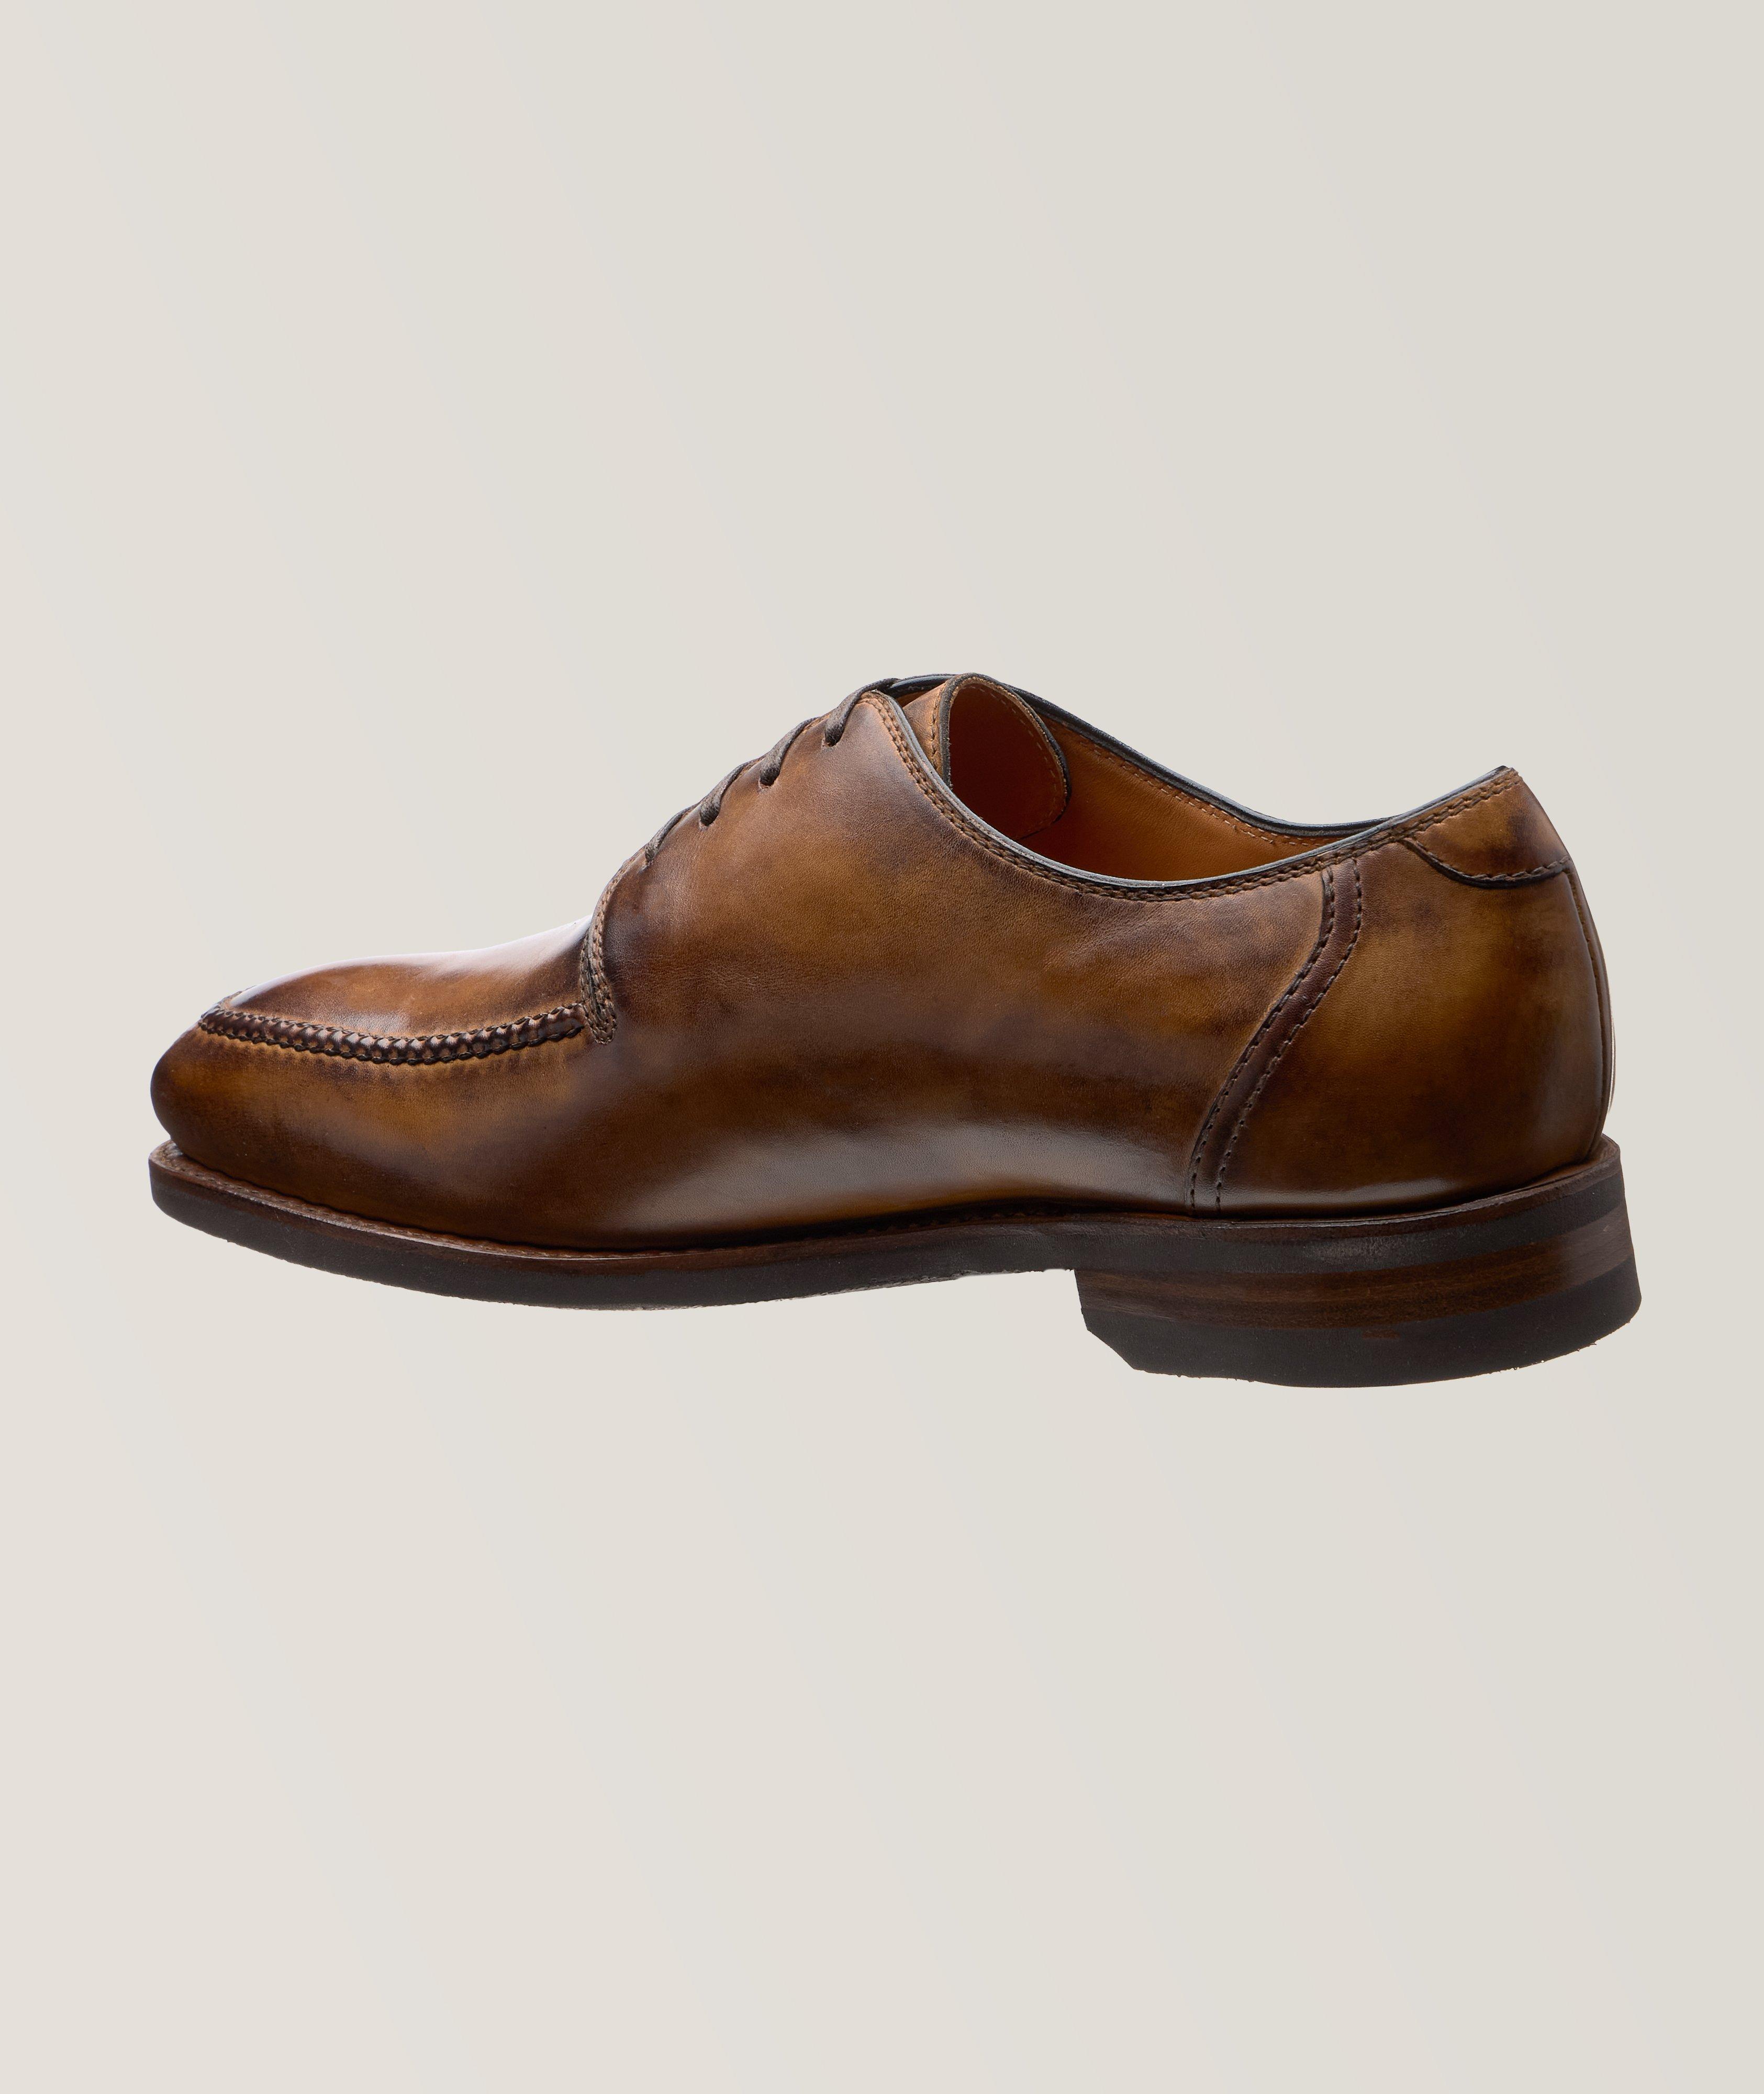 Squisto Burnished Leather Derbies image 1